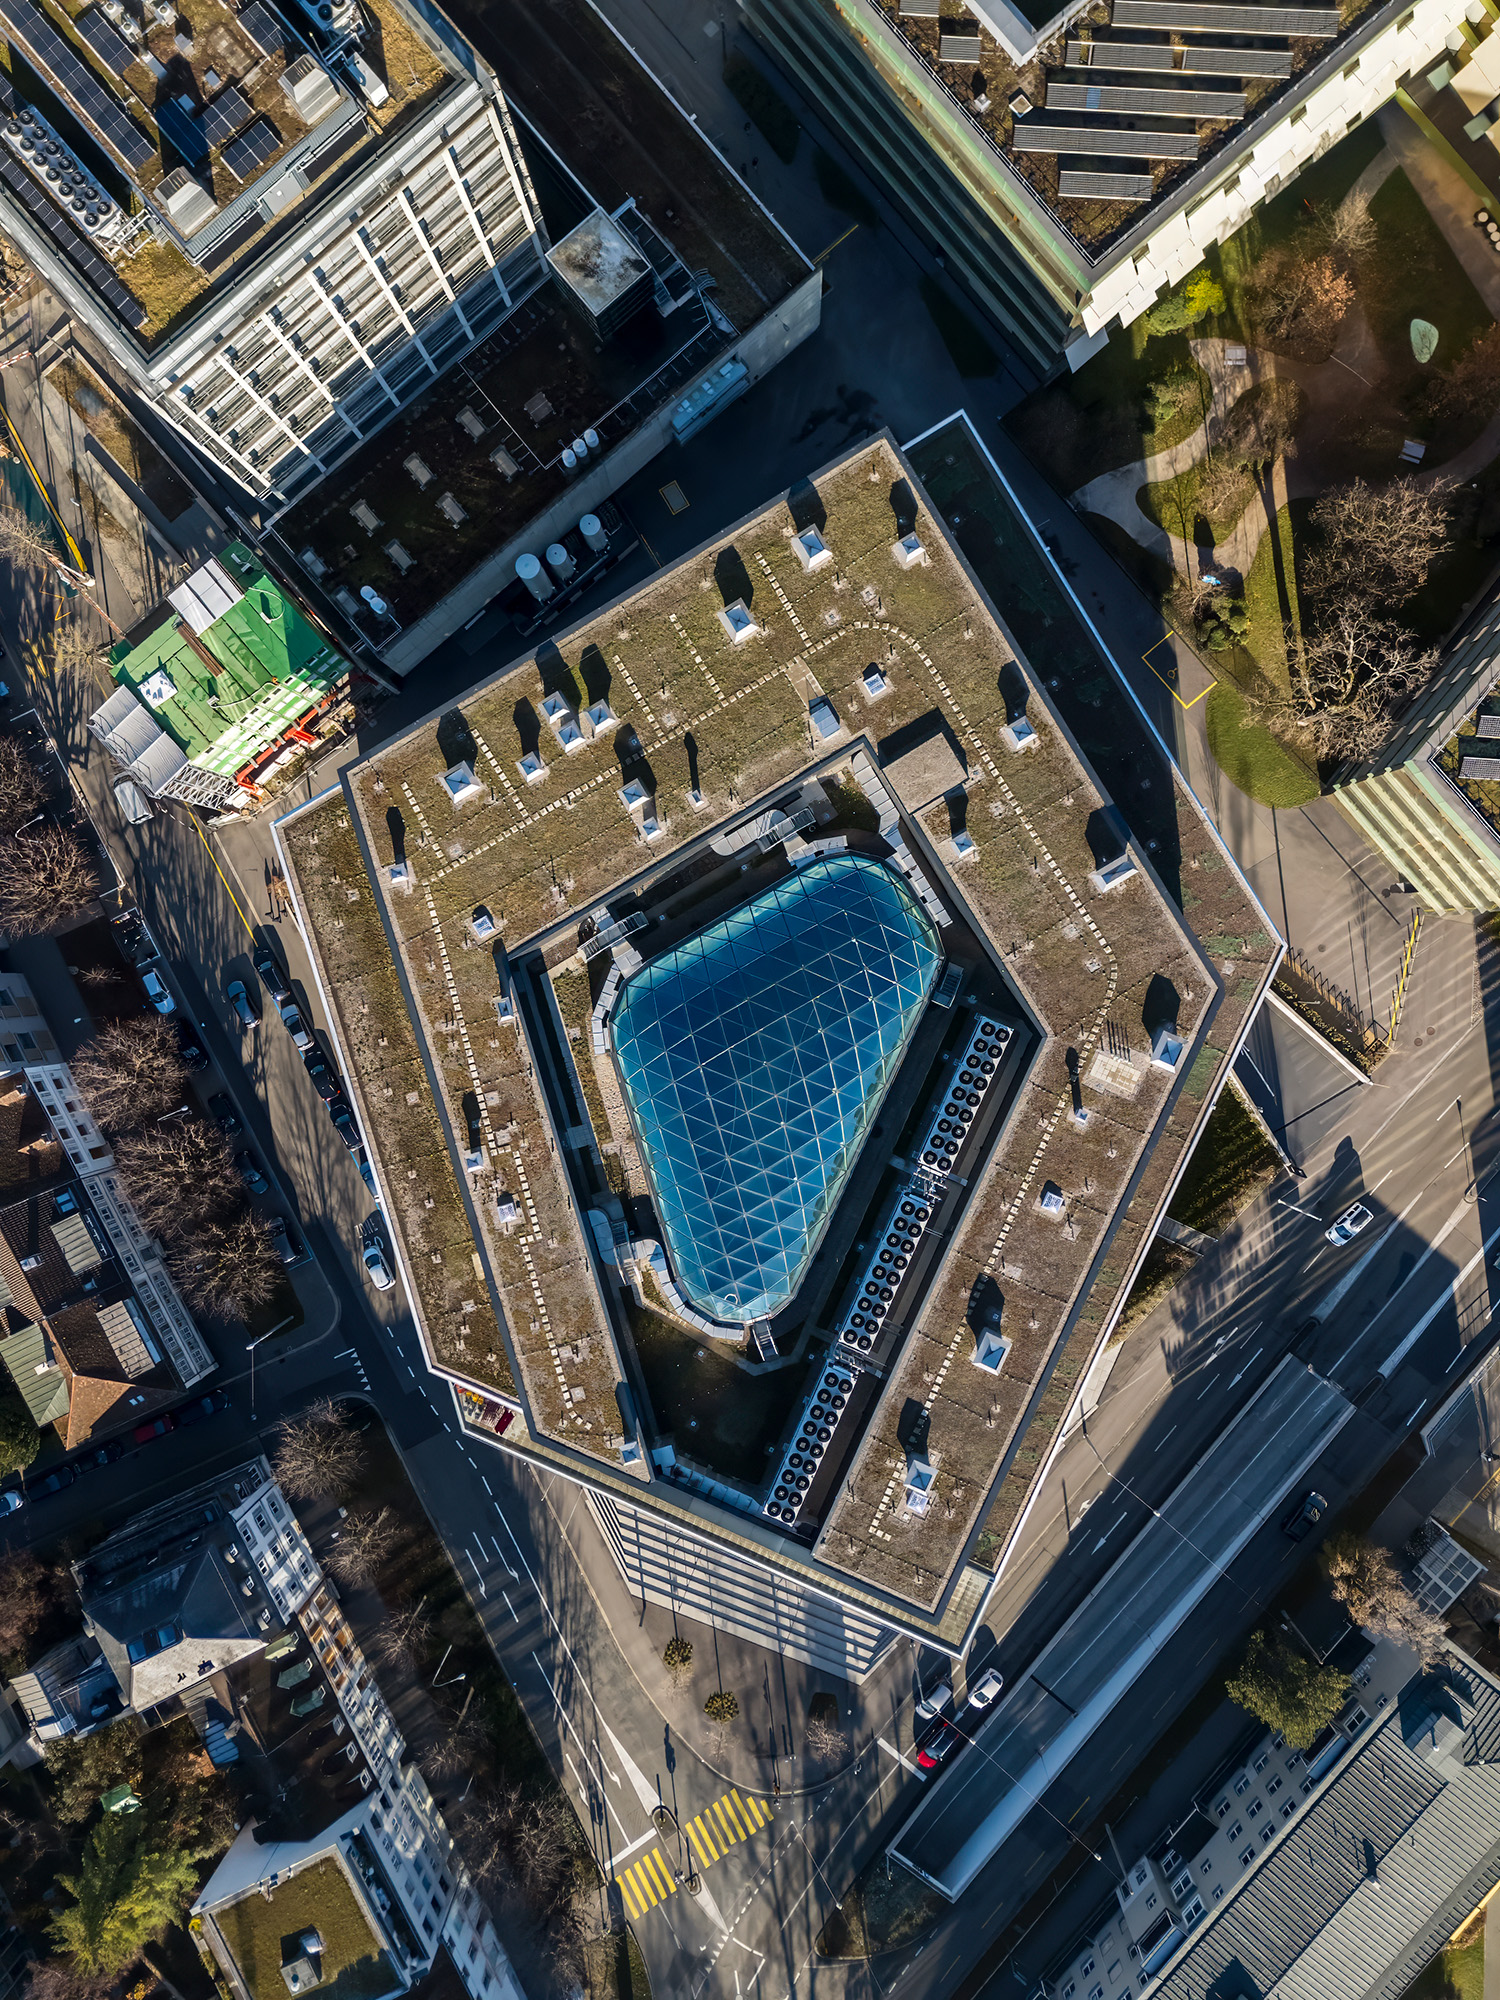 Bird's eye view of the BSS, glass roof is visible in light blue.